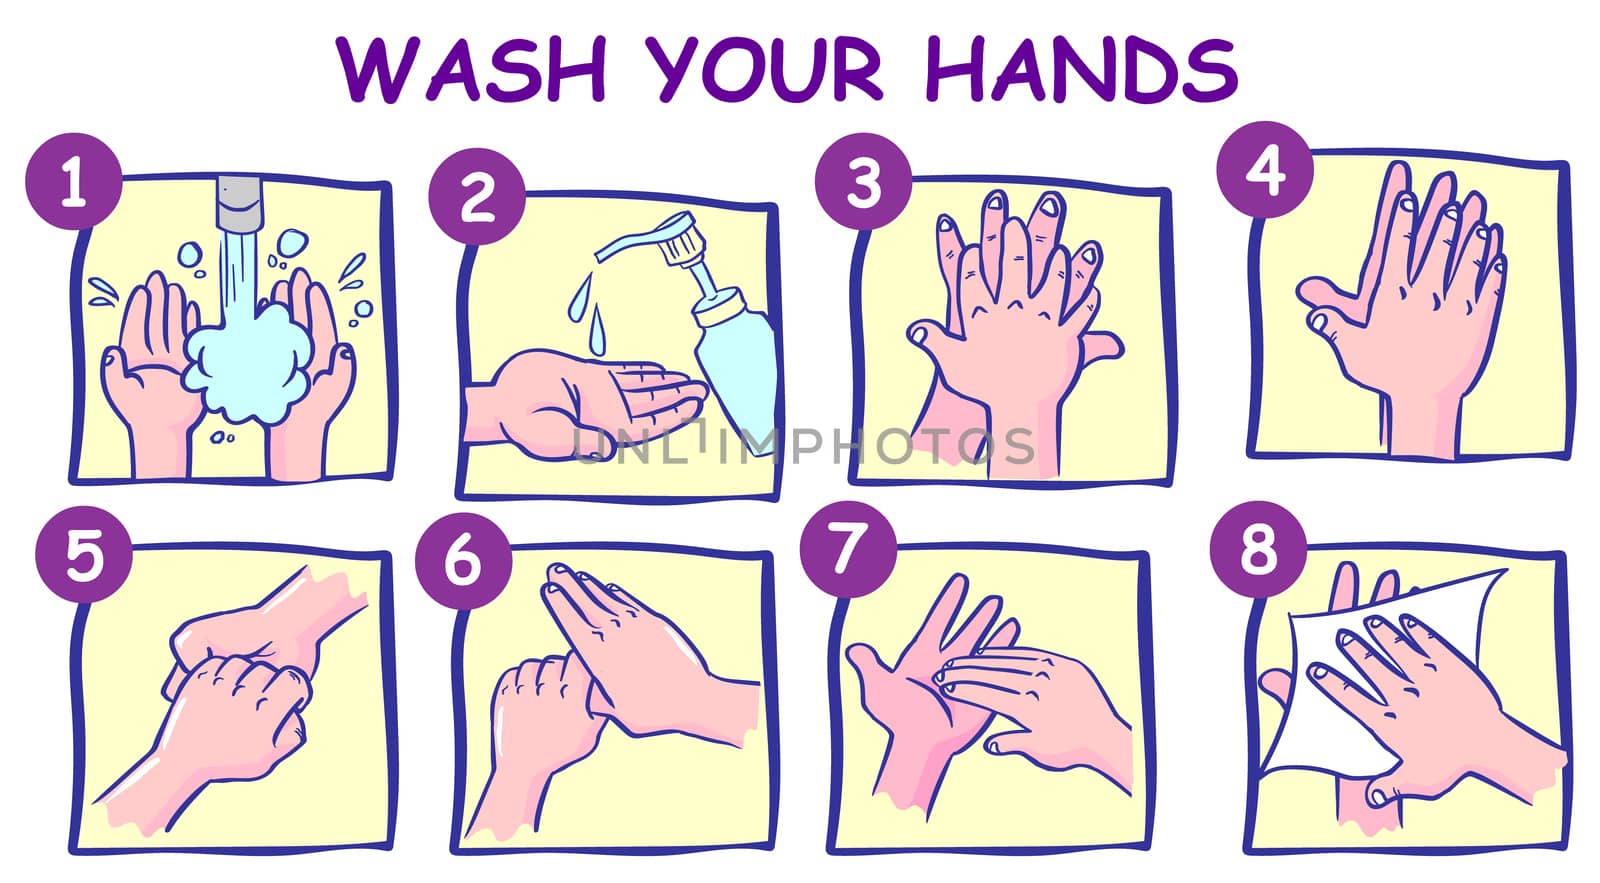 The right method of hand washing which will be safe from various germs.